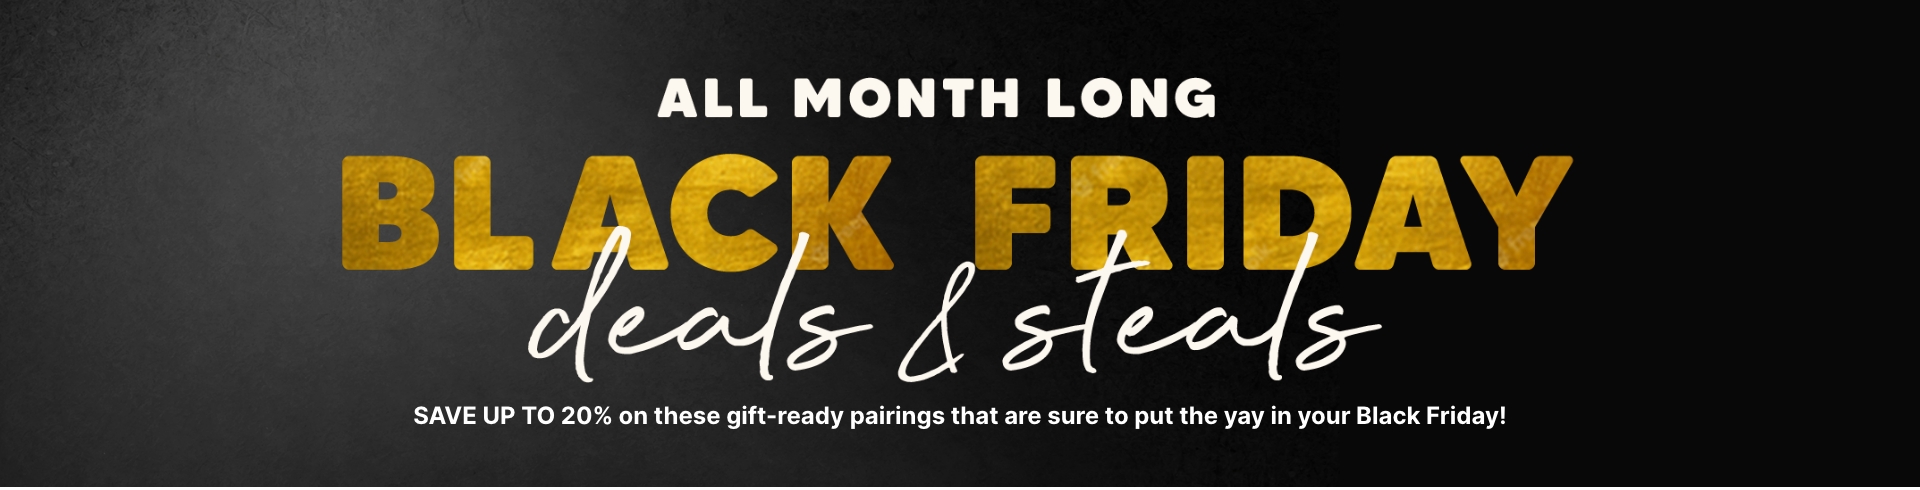 SAVE UP TO 20% on these gift-ready pairings that are sure to put the yay in your Black Friday!